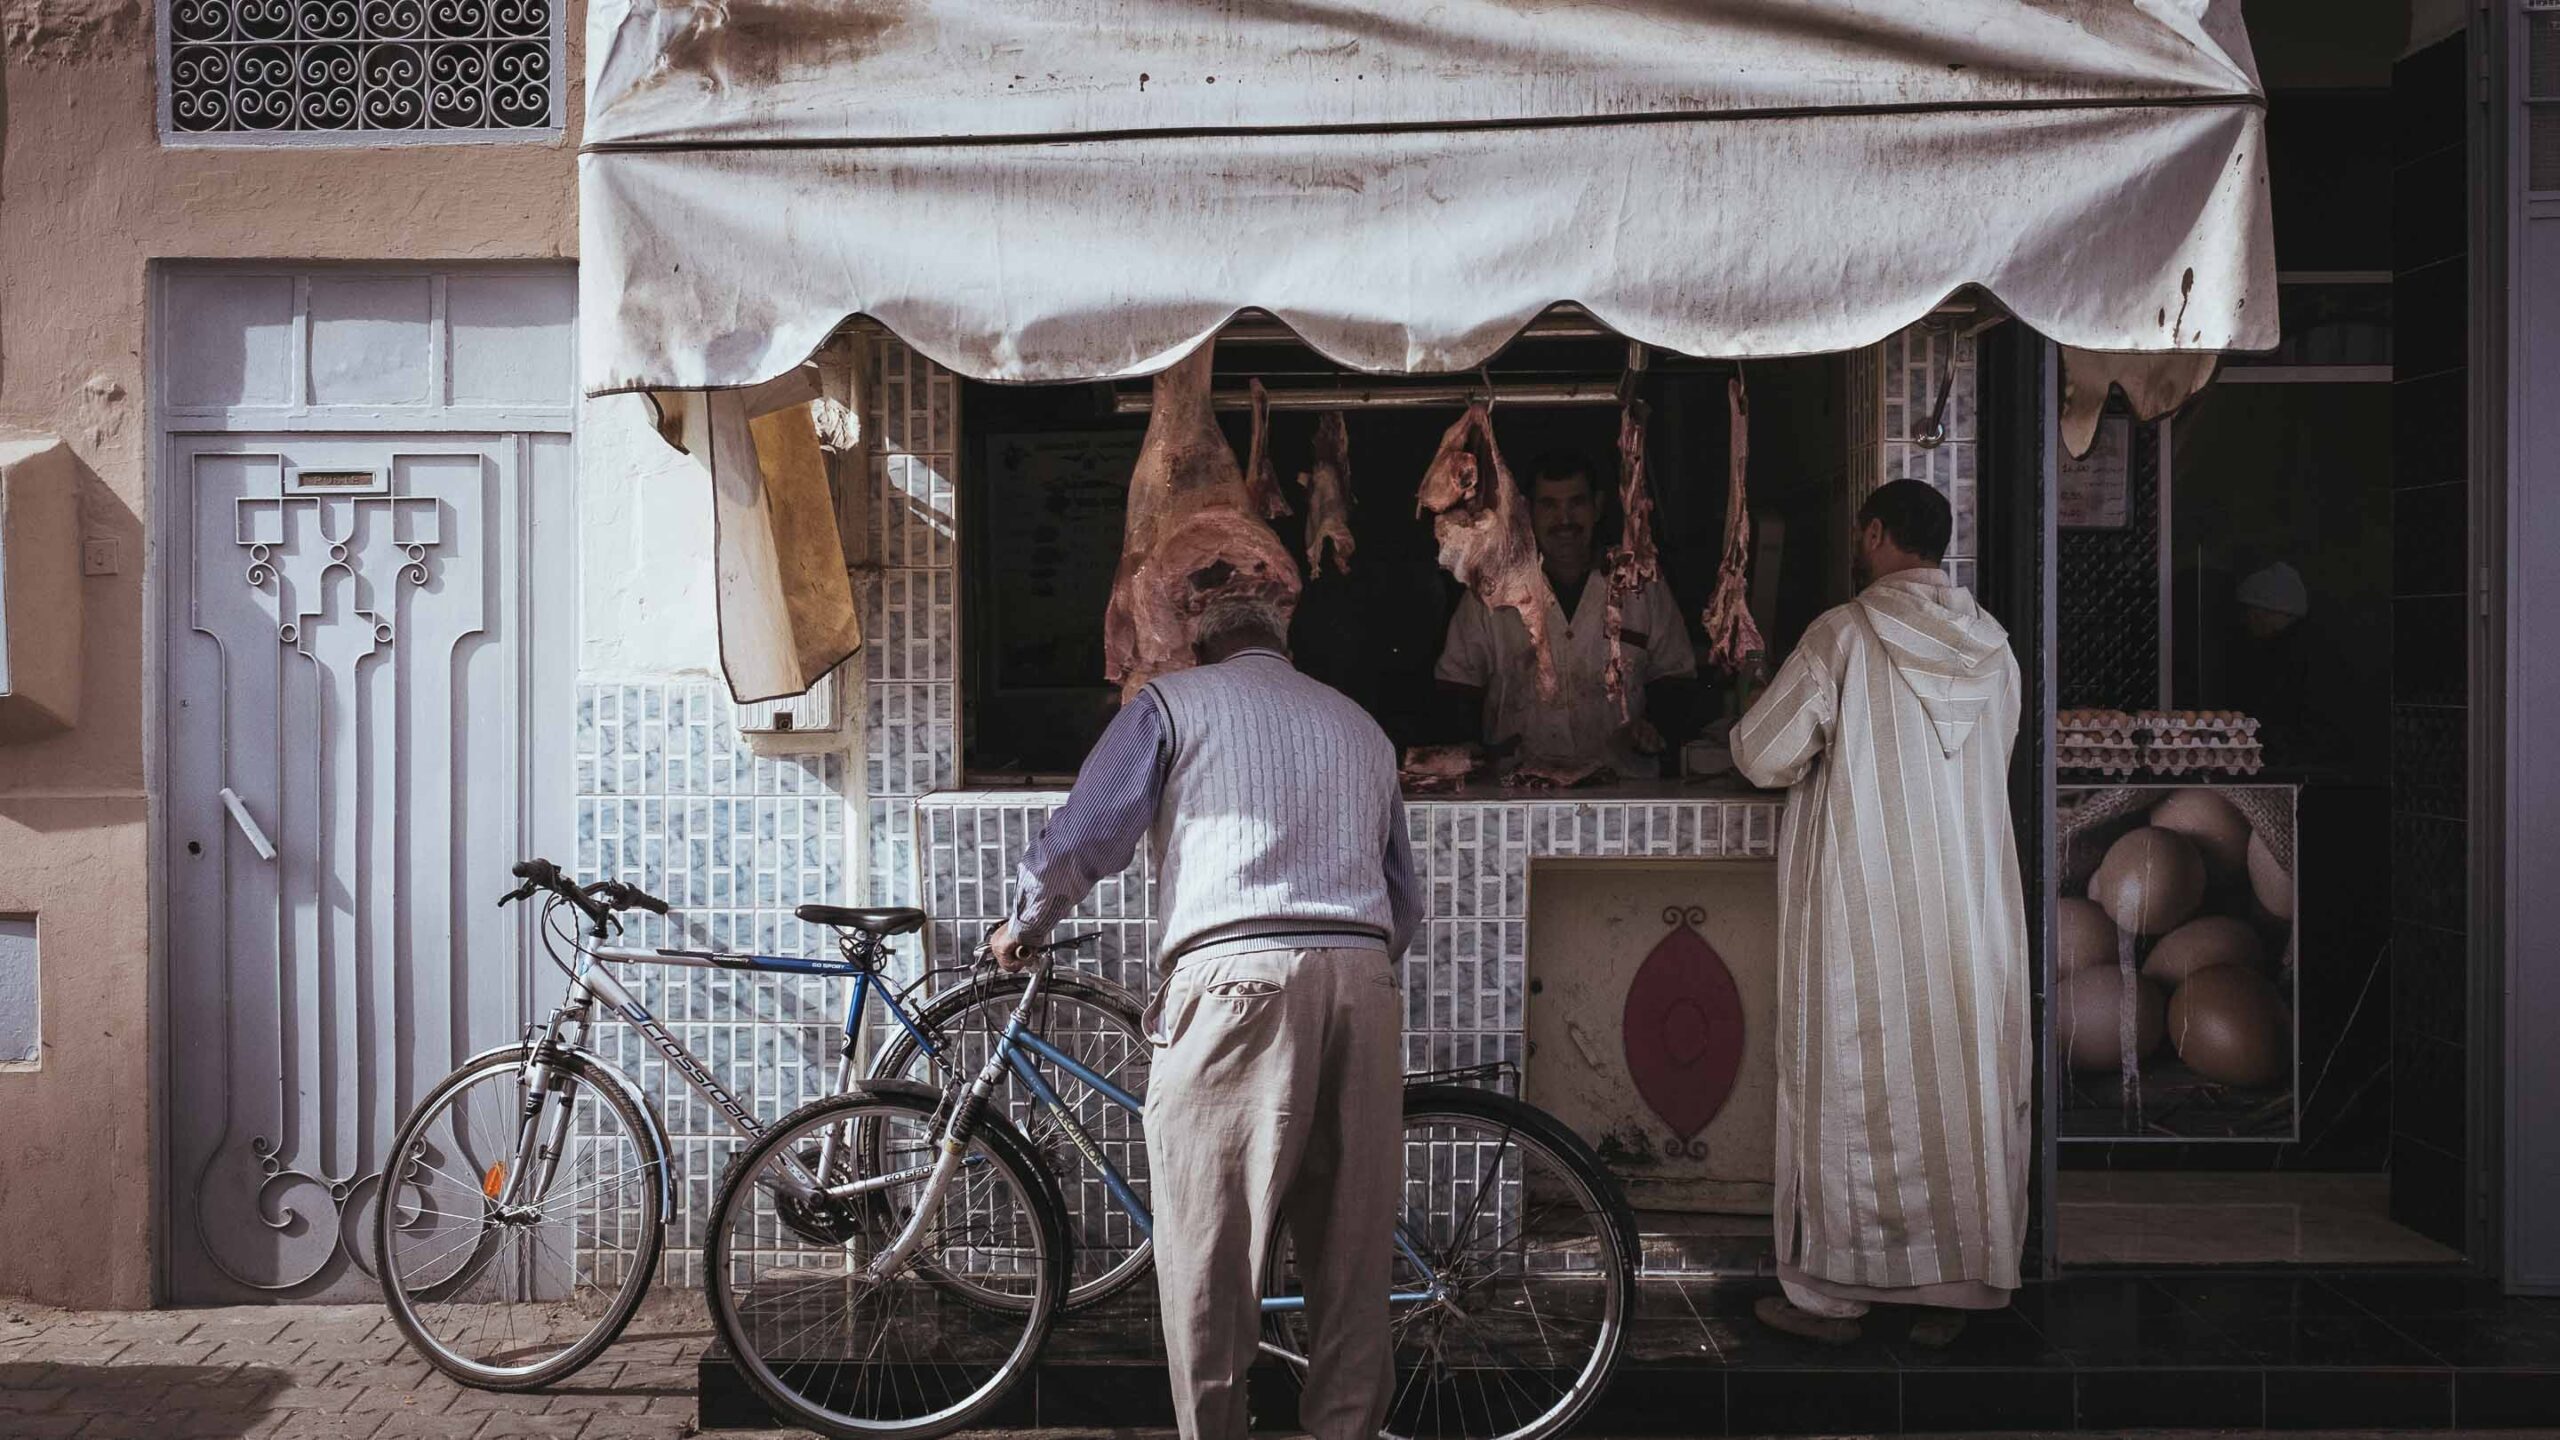 This picture shows a butcher shop in Morocco.